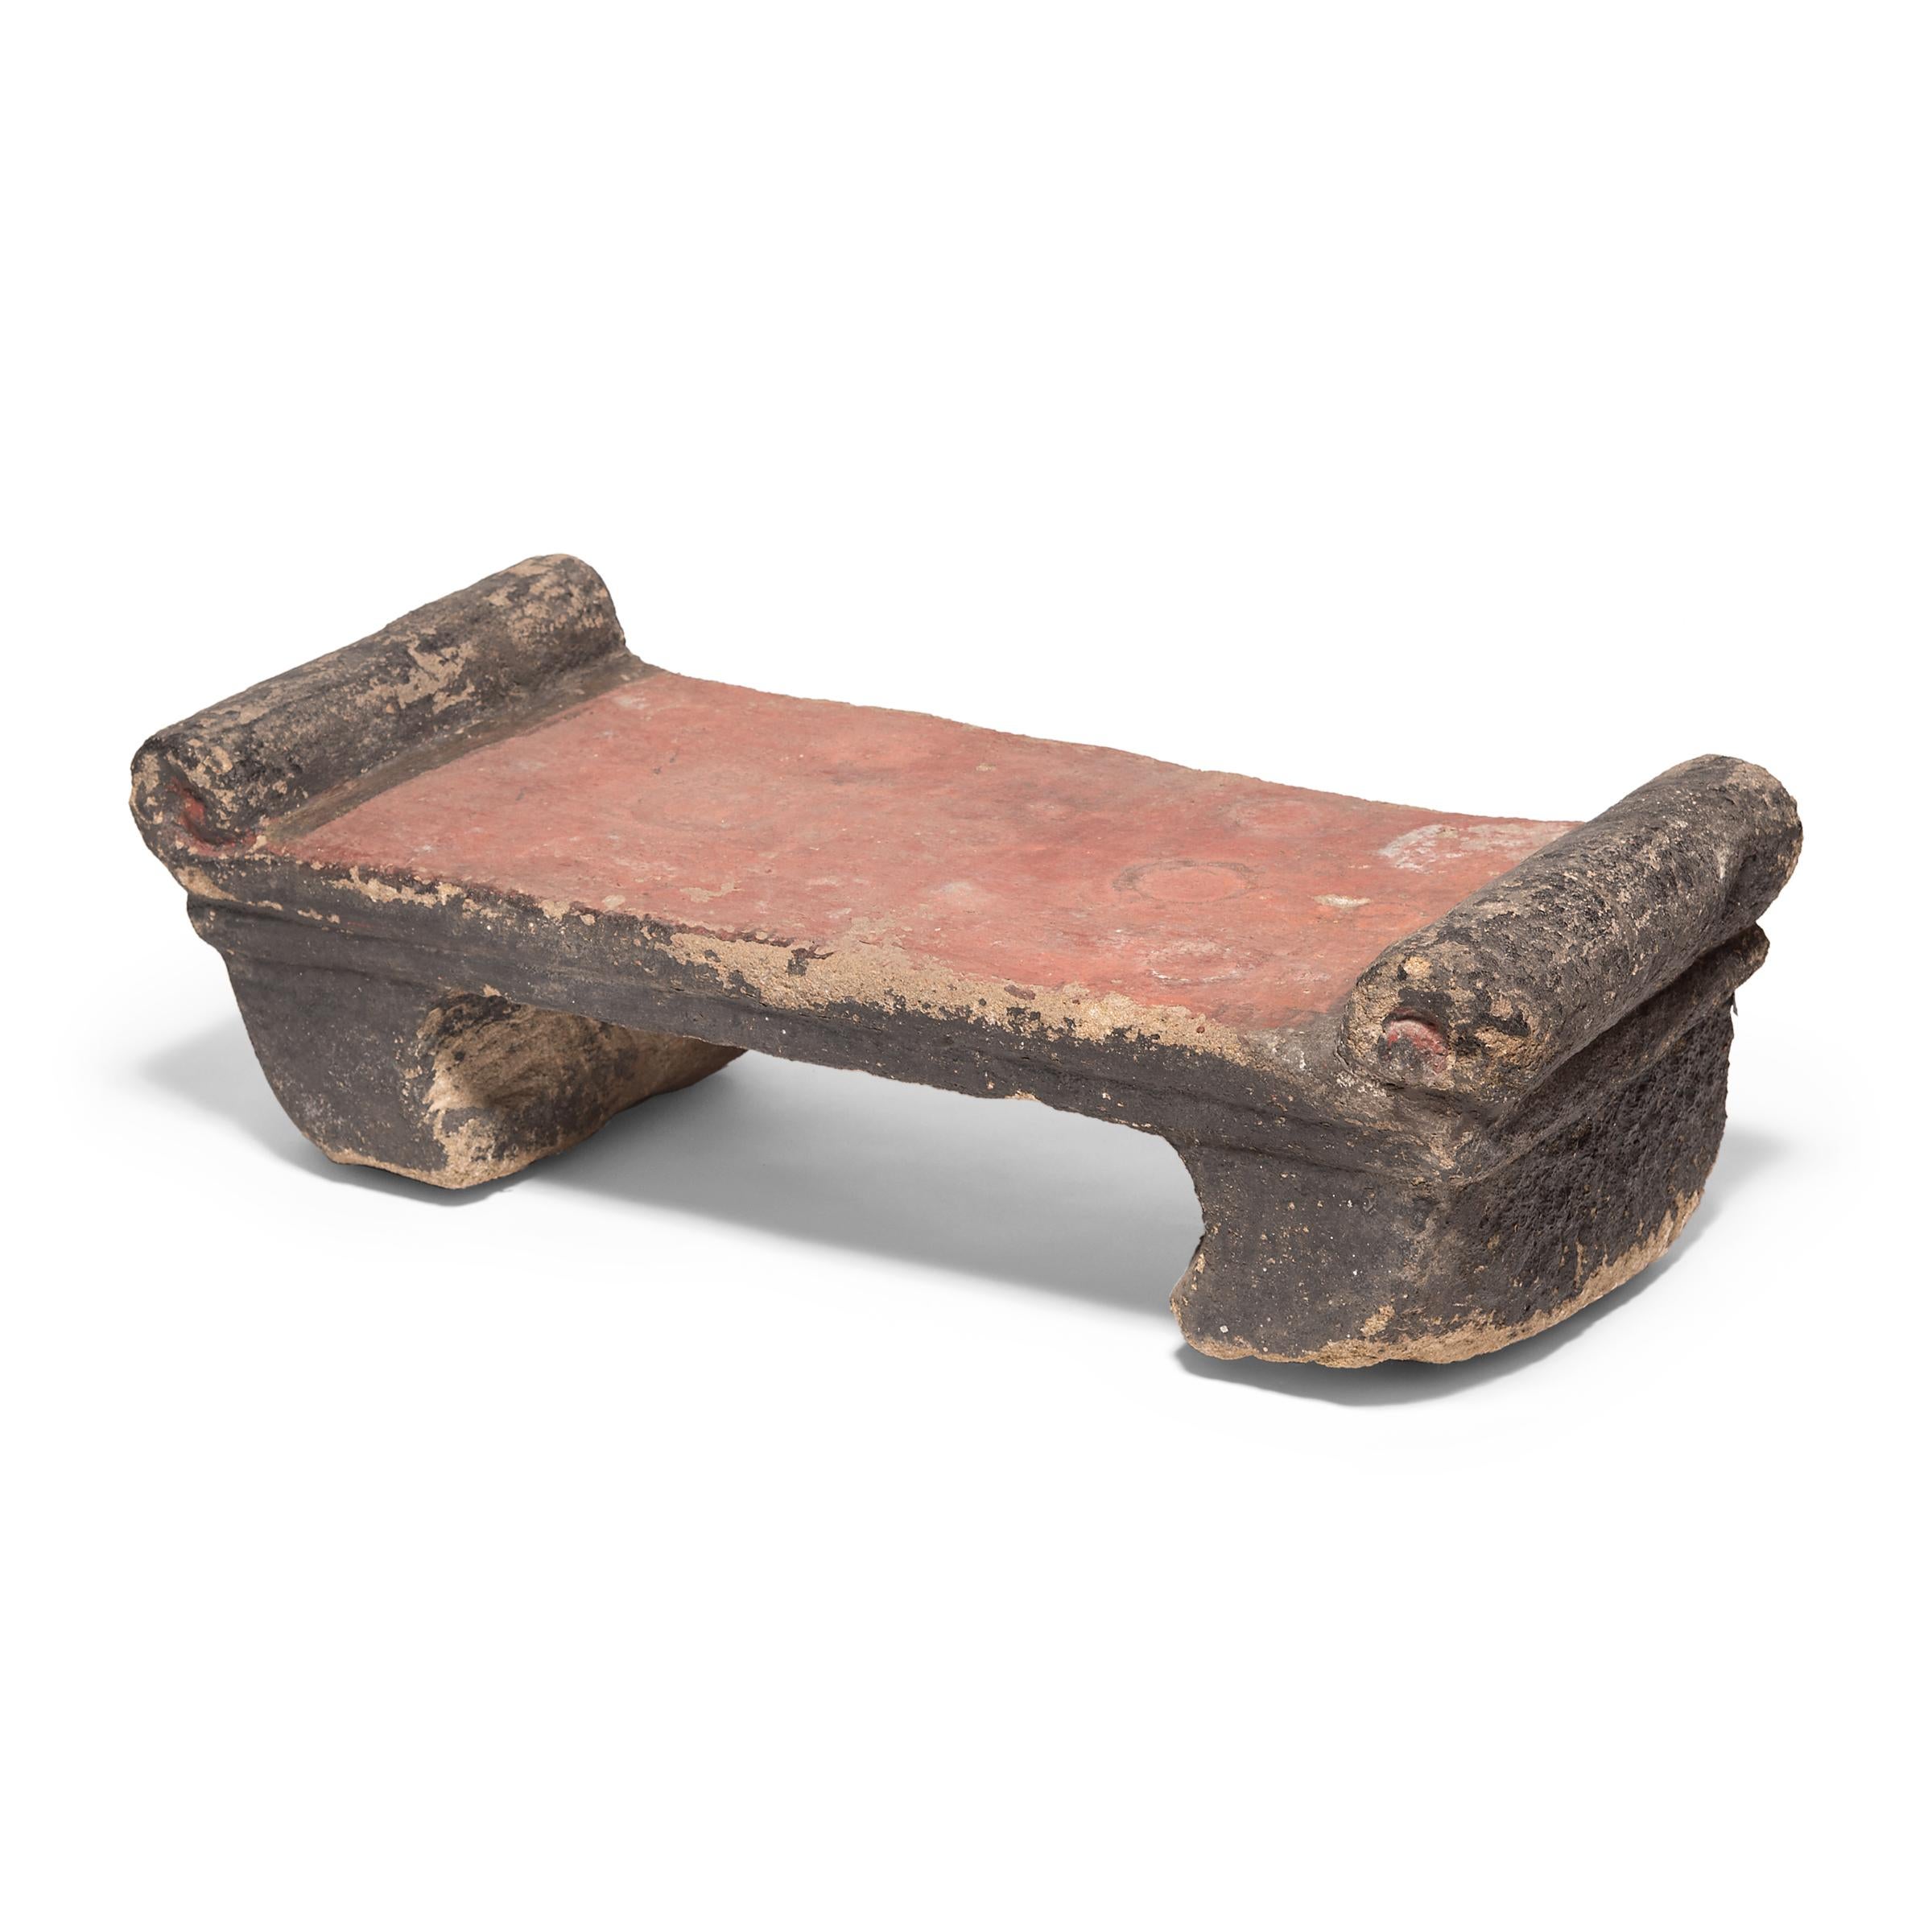 This tabletop altar with scrolled edges, a scalloped apron, and turned legs from China's Shanxi province is a rare find. We conservatively estimate it to be late Ming dynasty (circa 1600), but it is very likely even older. This altar was carved by